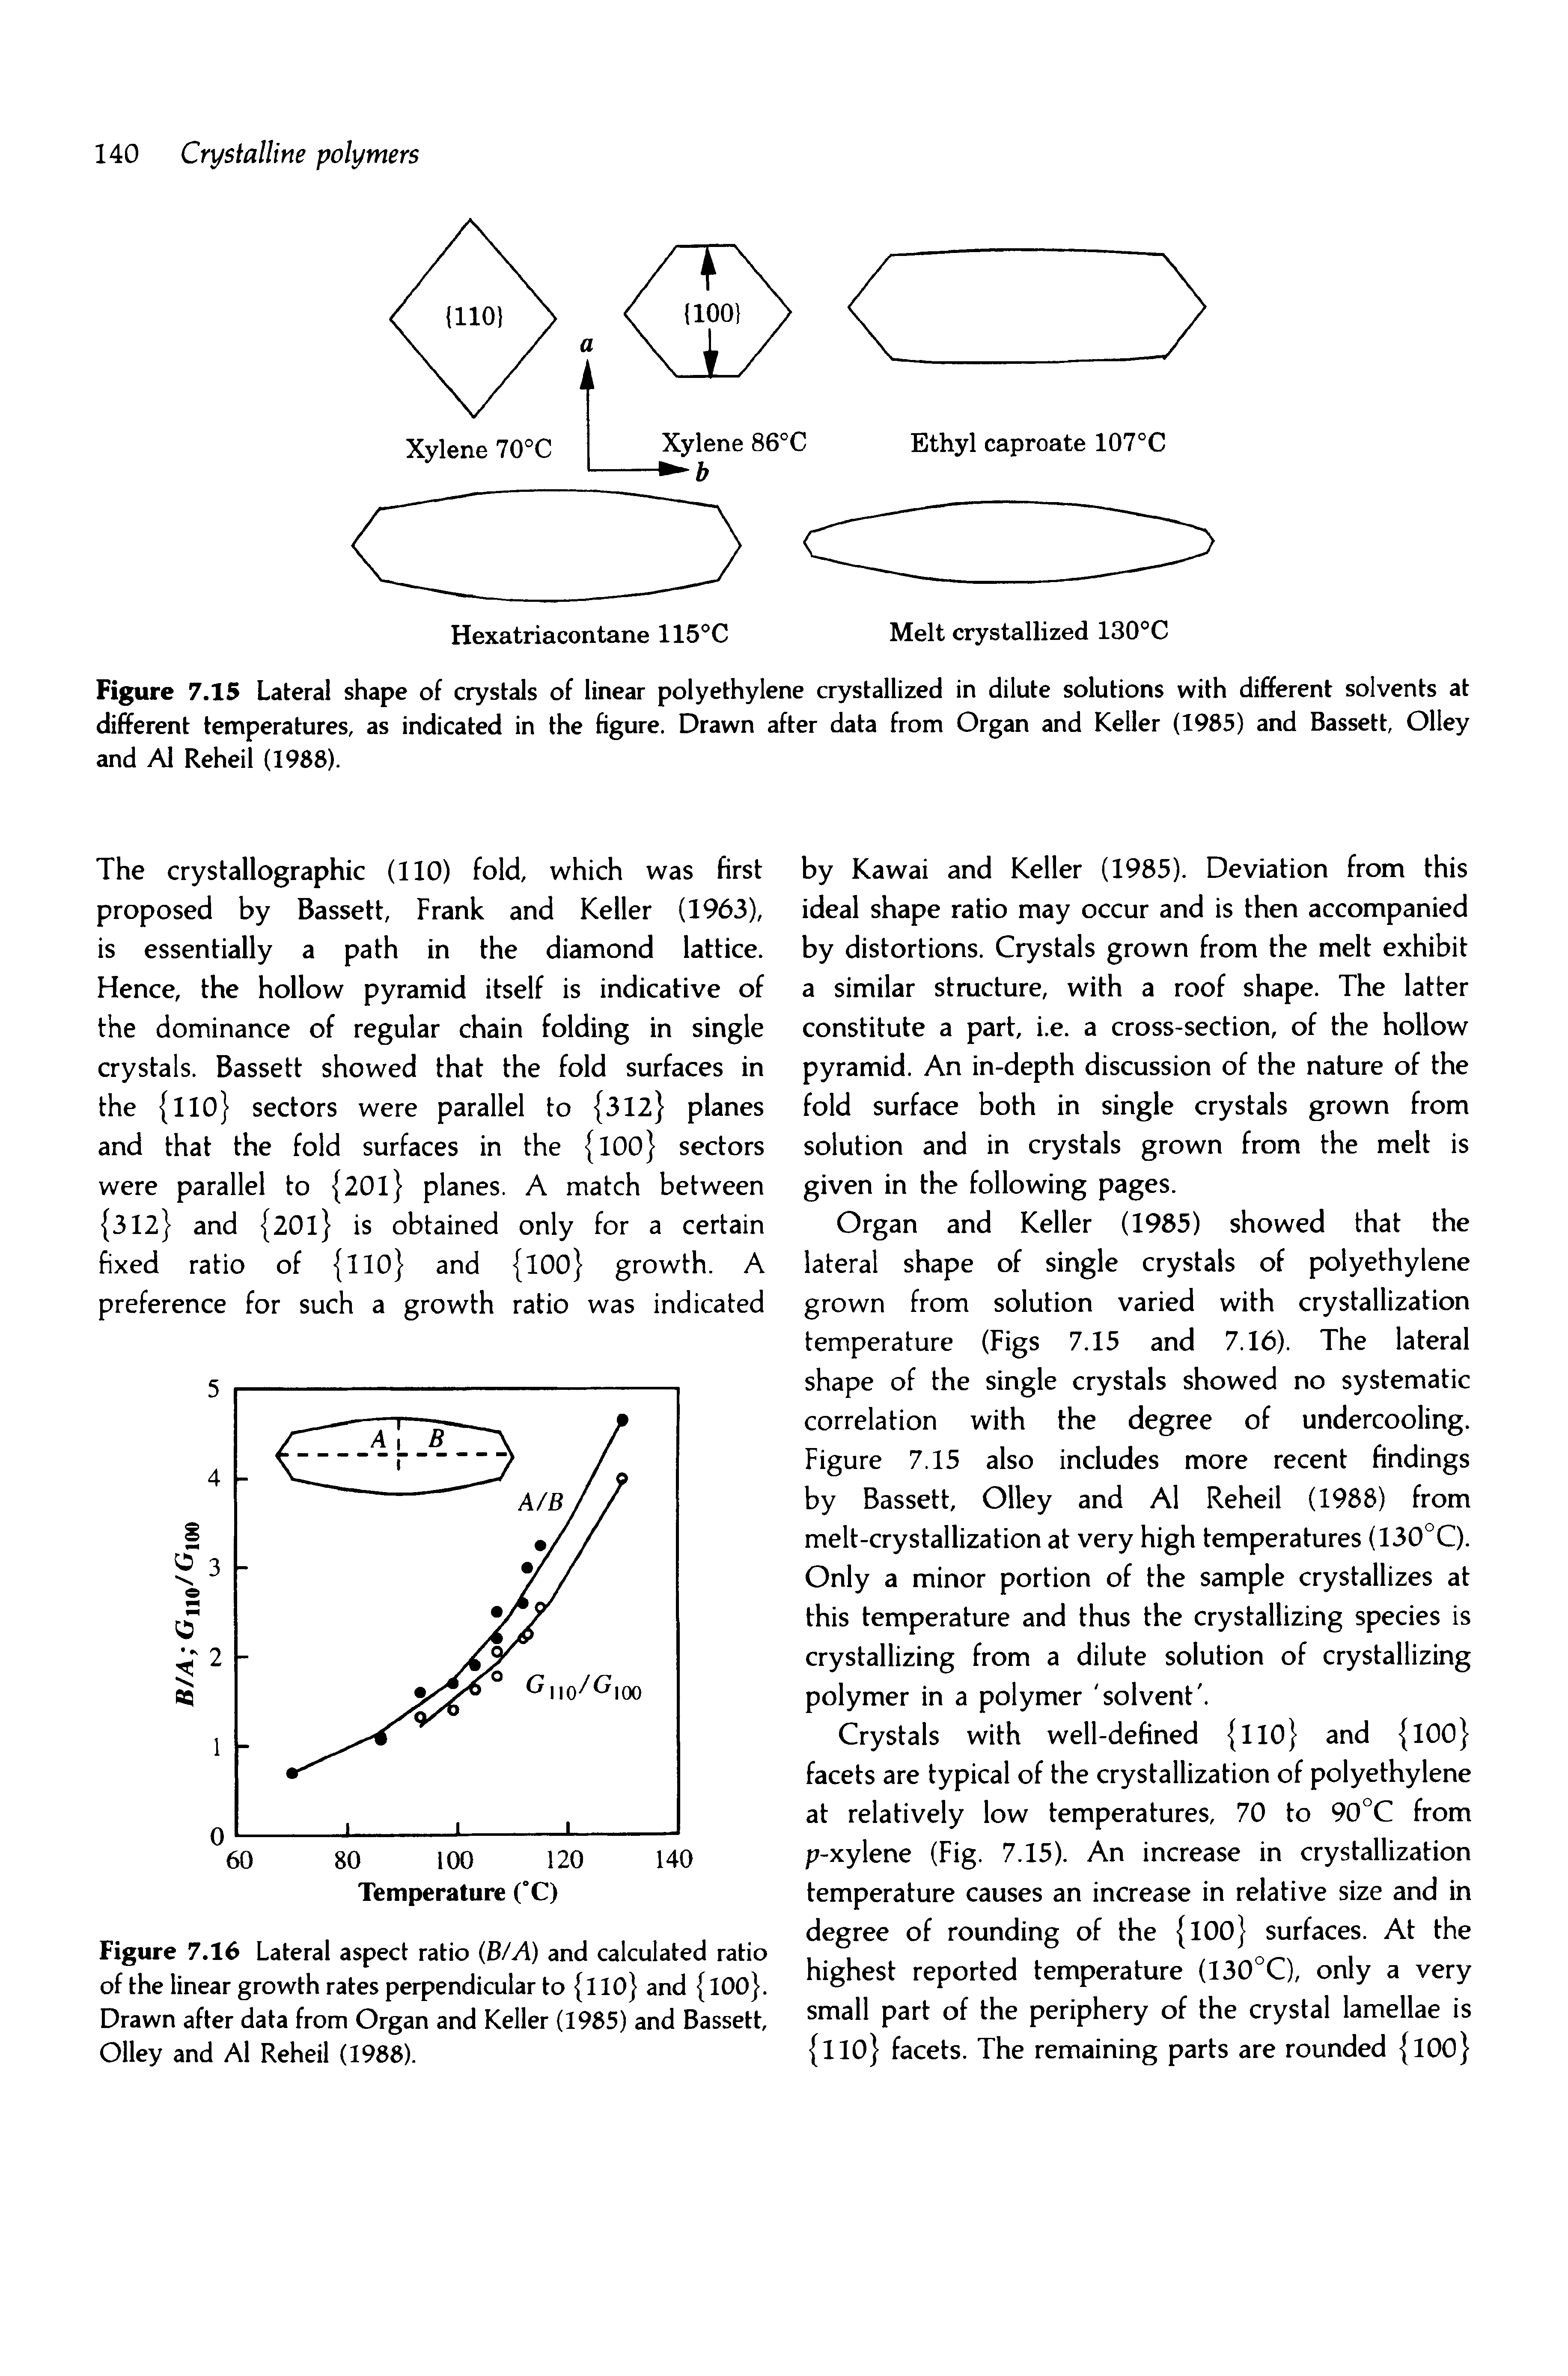 Figure 7.15 Lateral shape of crystals of linear polyethylene crystallized in dilute solutions with different solvents at different temperatures, as indicated in the figure. Drawn after data from Organ and Keller (1985) and Bassett, Olley and A1 Reheil (1988).